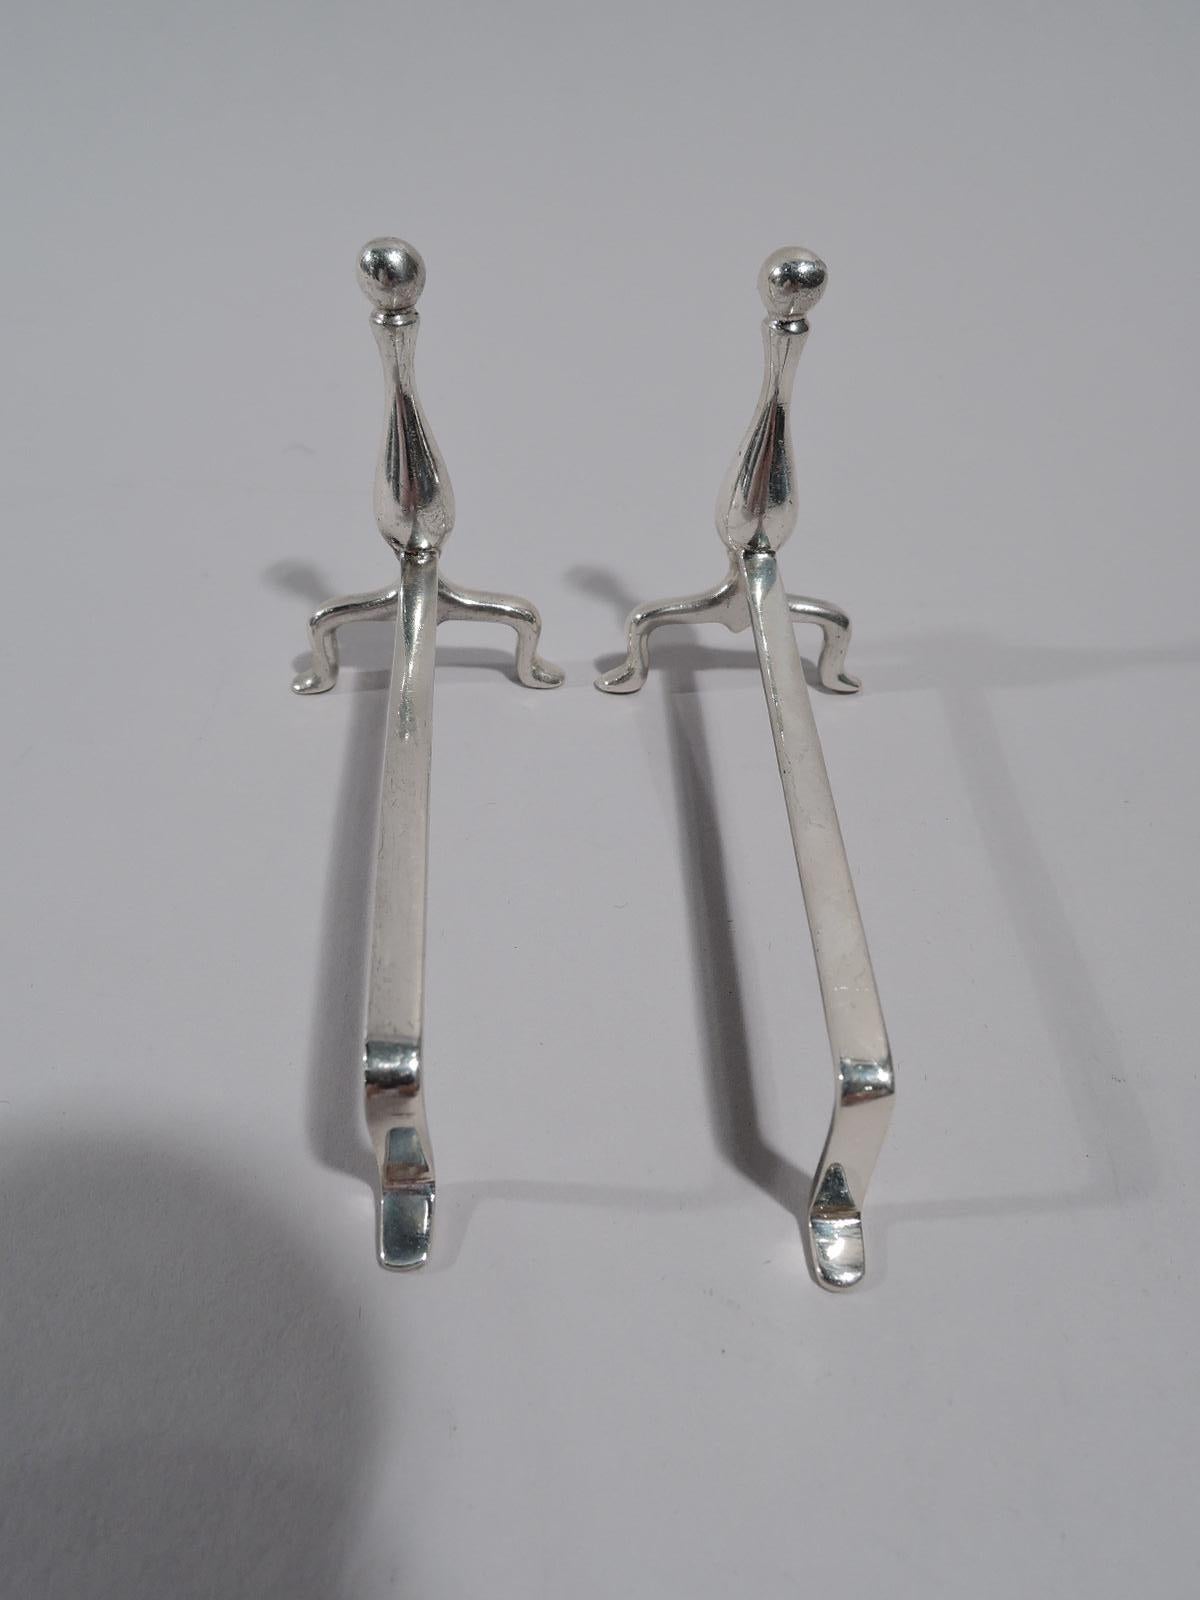 Pair of American sterling silver knife rests, circa 1920. Each: Baluster on split and spread foot mounted to horizontal rail with L-form support. Colonial Revival style in the form of old-fashioned andirons. Marked “Sterling”. Total weight: 1 troy